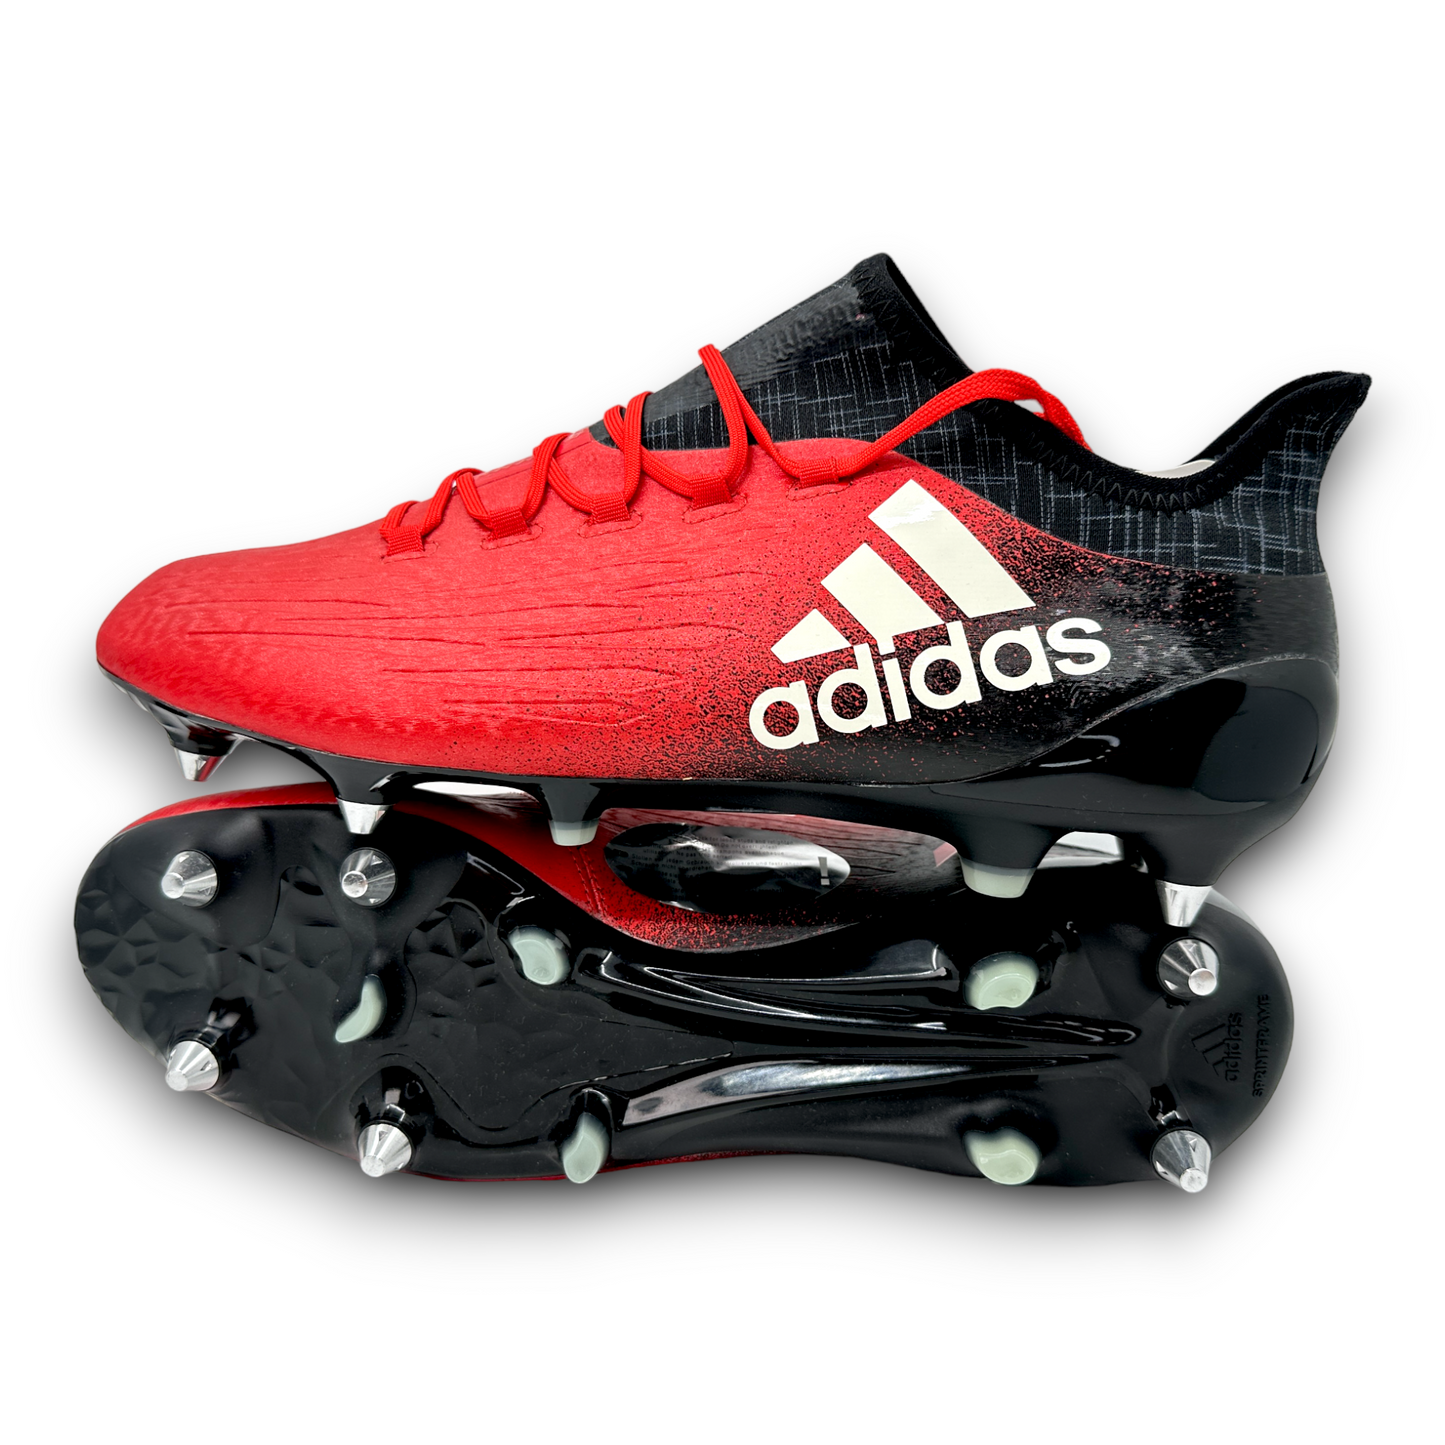 Adidas X SG "Red Pack" shoptcrampons